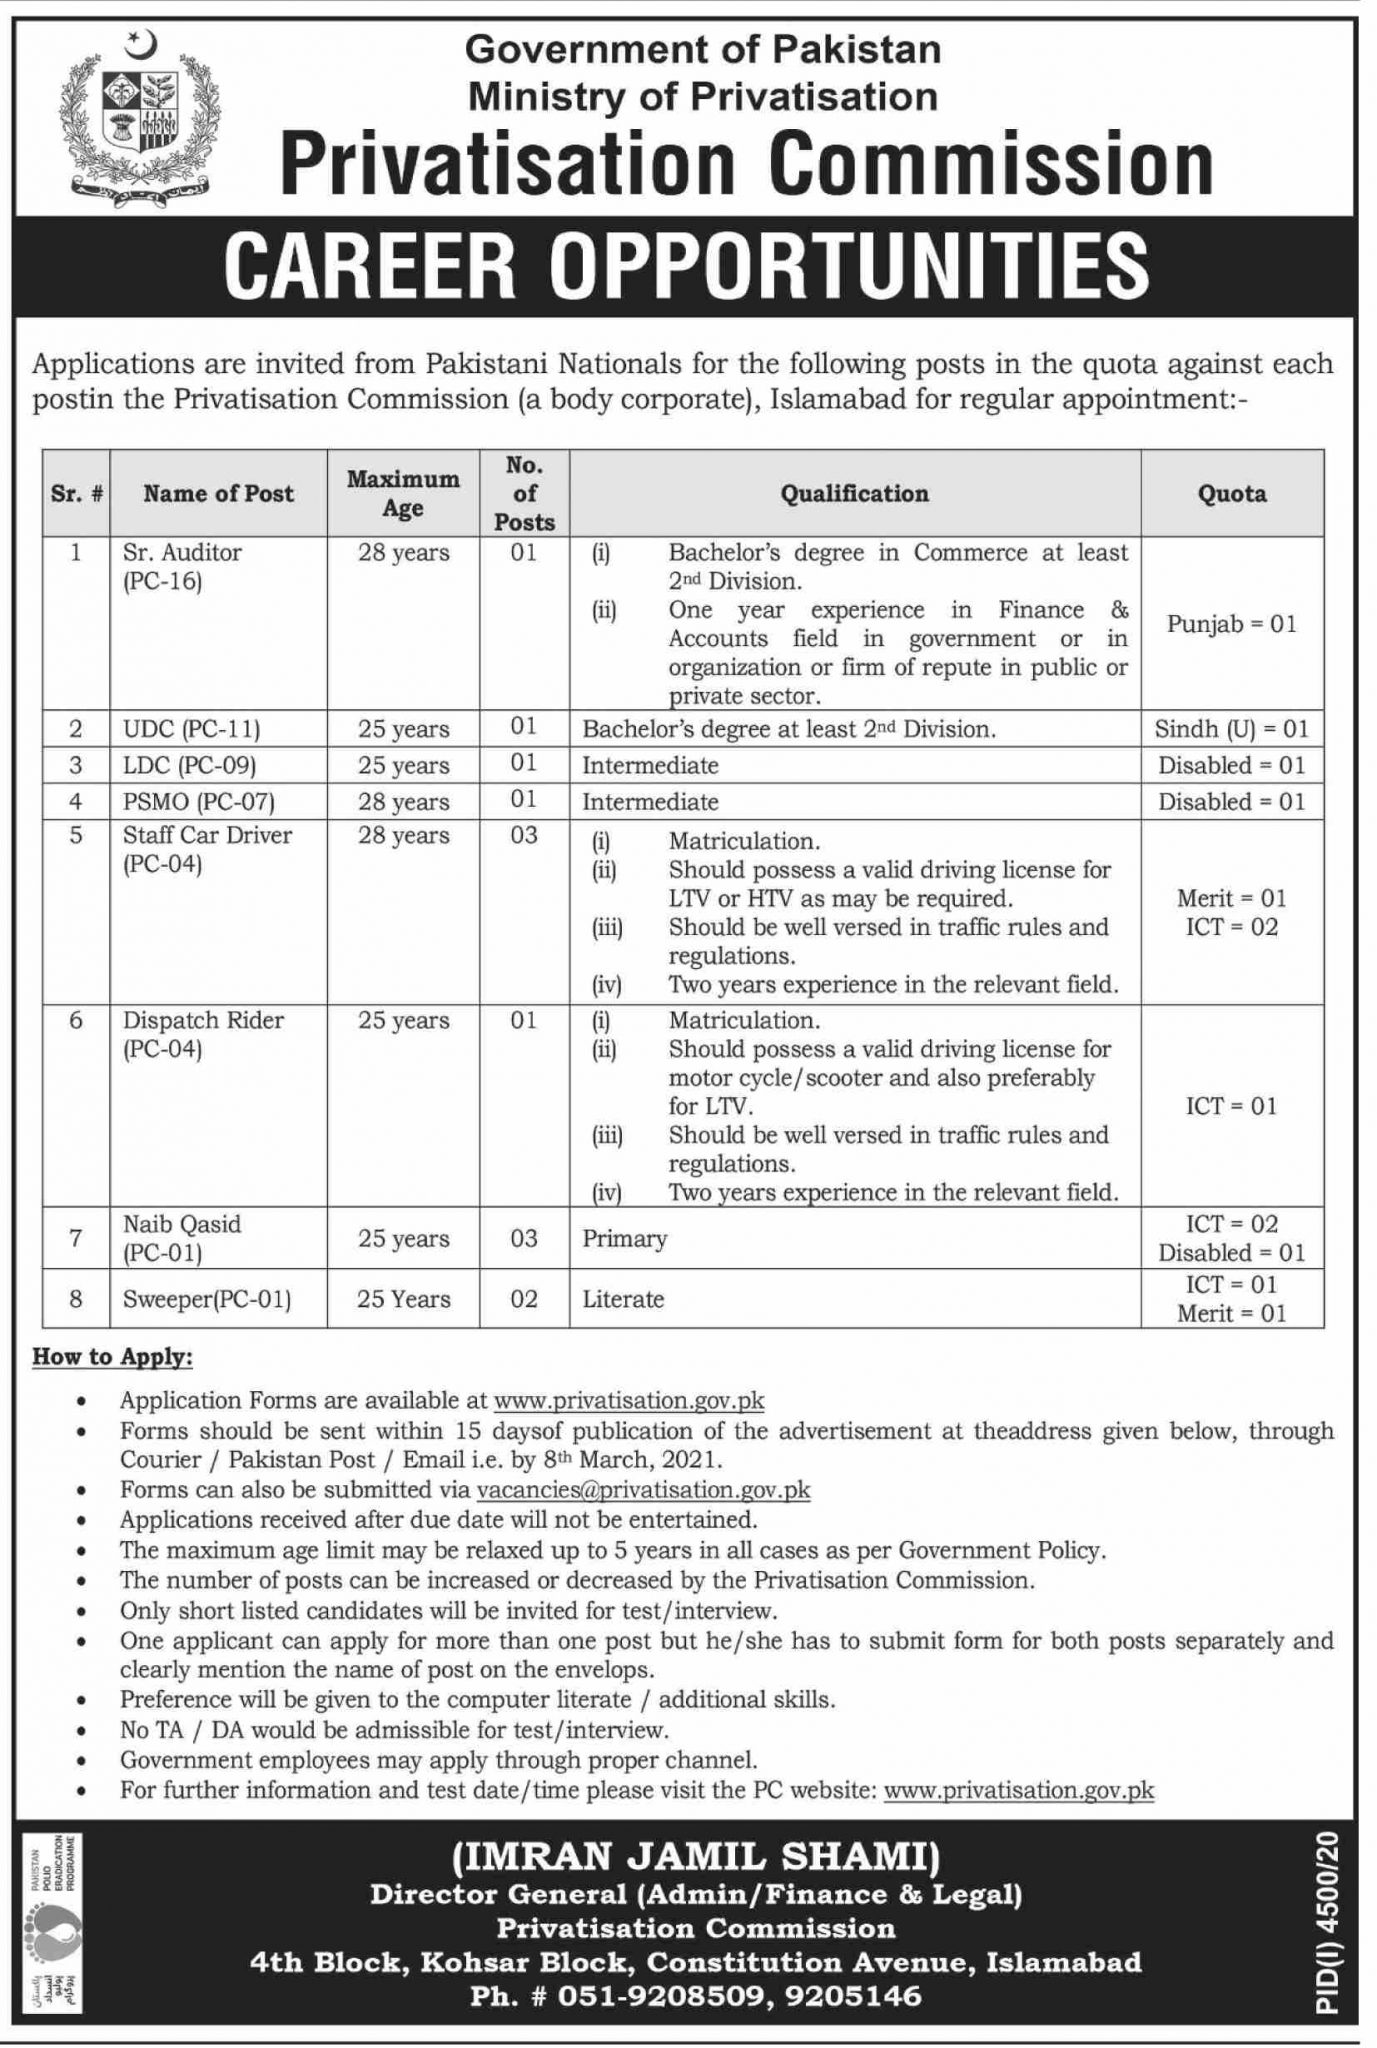 Ministry of Privatization Islamabad Jobs 2021 February Application Form Drivers, Clerks & Others Latest